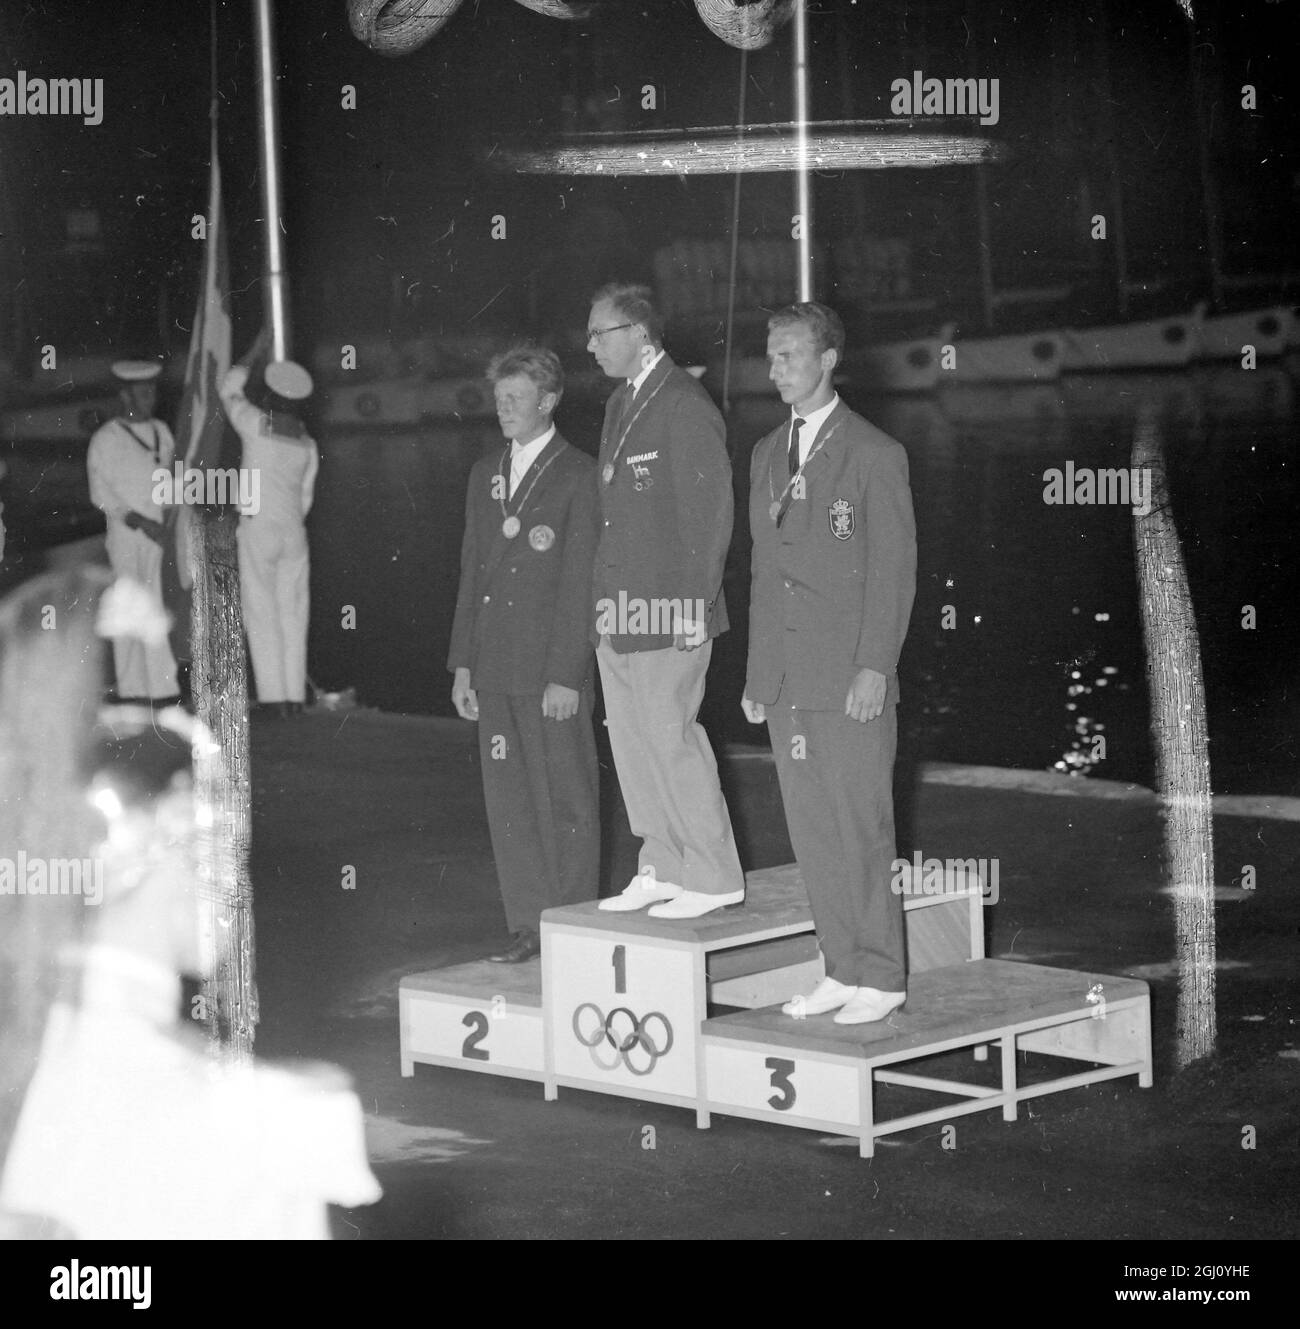 Picture shows winners of the Olympic Yachting, Finn class, on the podium during the medal presentation last night. In the centre is the Gold Medallist Denmark Paul Bert Elvstrom. At the left the Silver medallist Alexandr Chuchelov (USSR), and at the right the Bronze Medallist of Belgium Andre Nelis. The medals were presented by Iva Vind the Danish Member of the International Olympic Committee. 8 SEPTEMBER 1960 Stock Photo